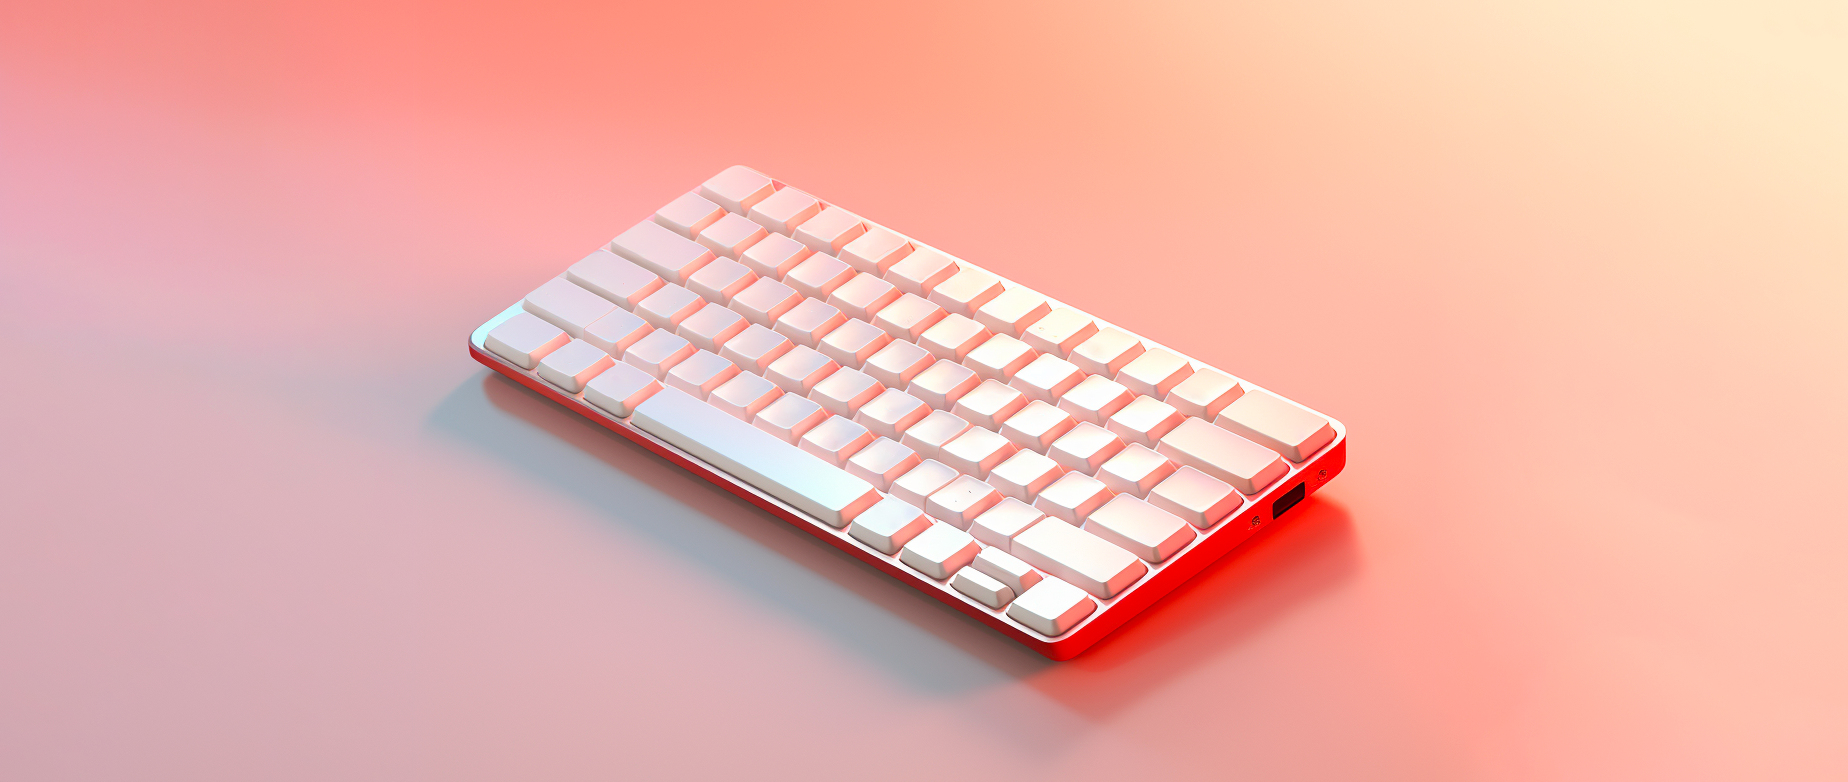 A white keyboard on a light red and yellow background.